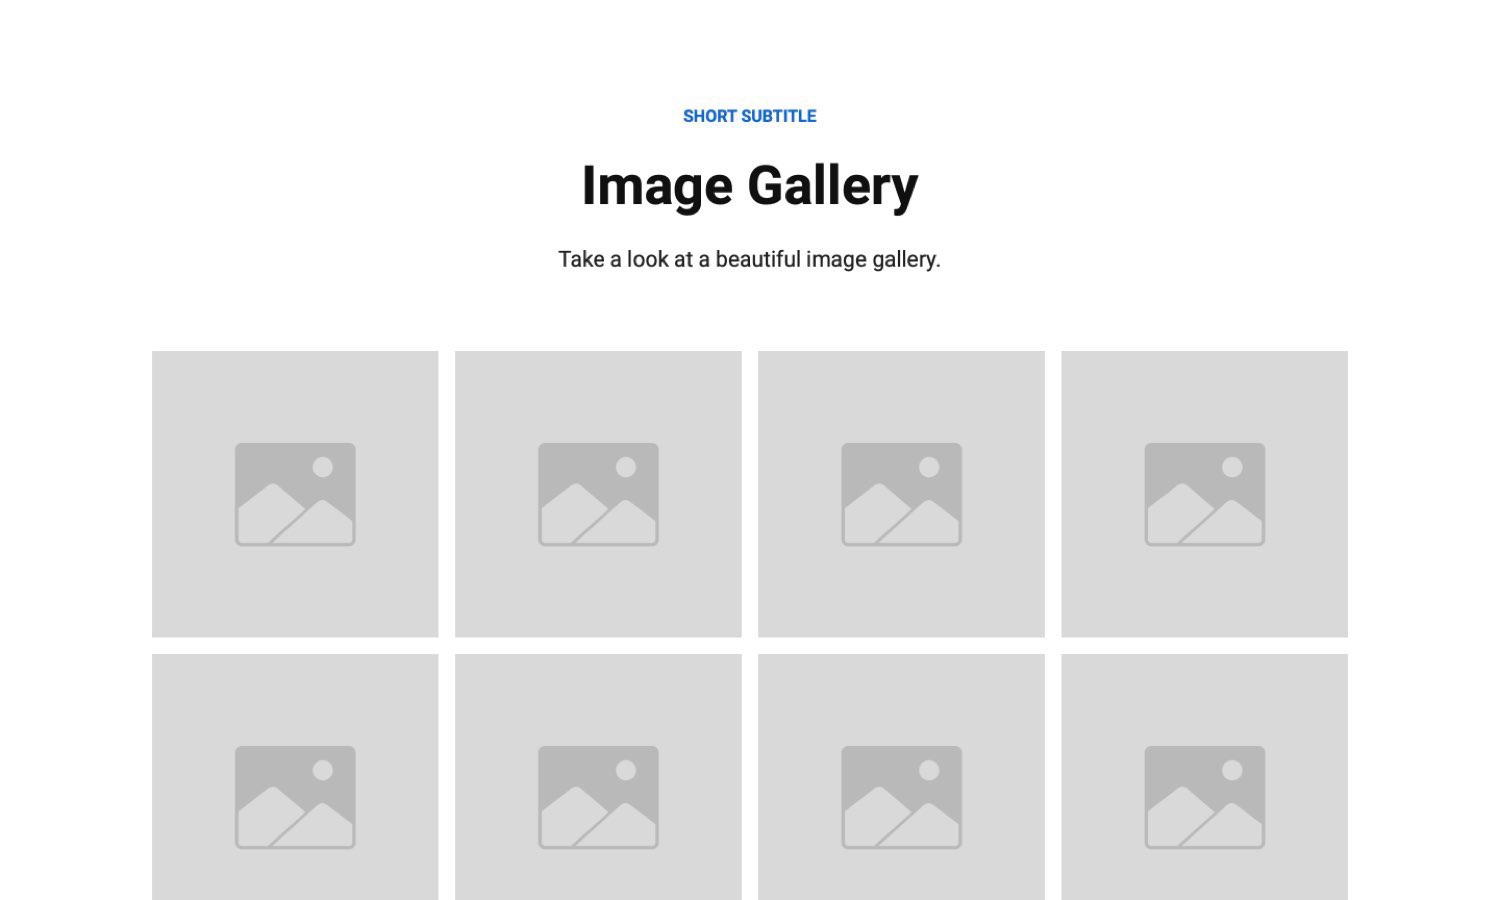 image gallery design section